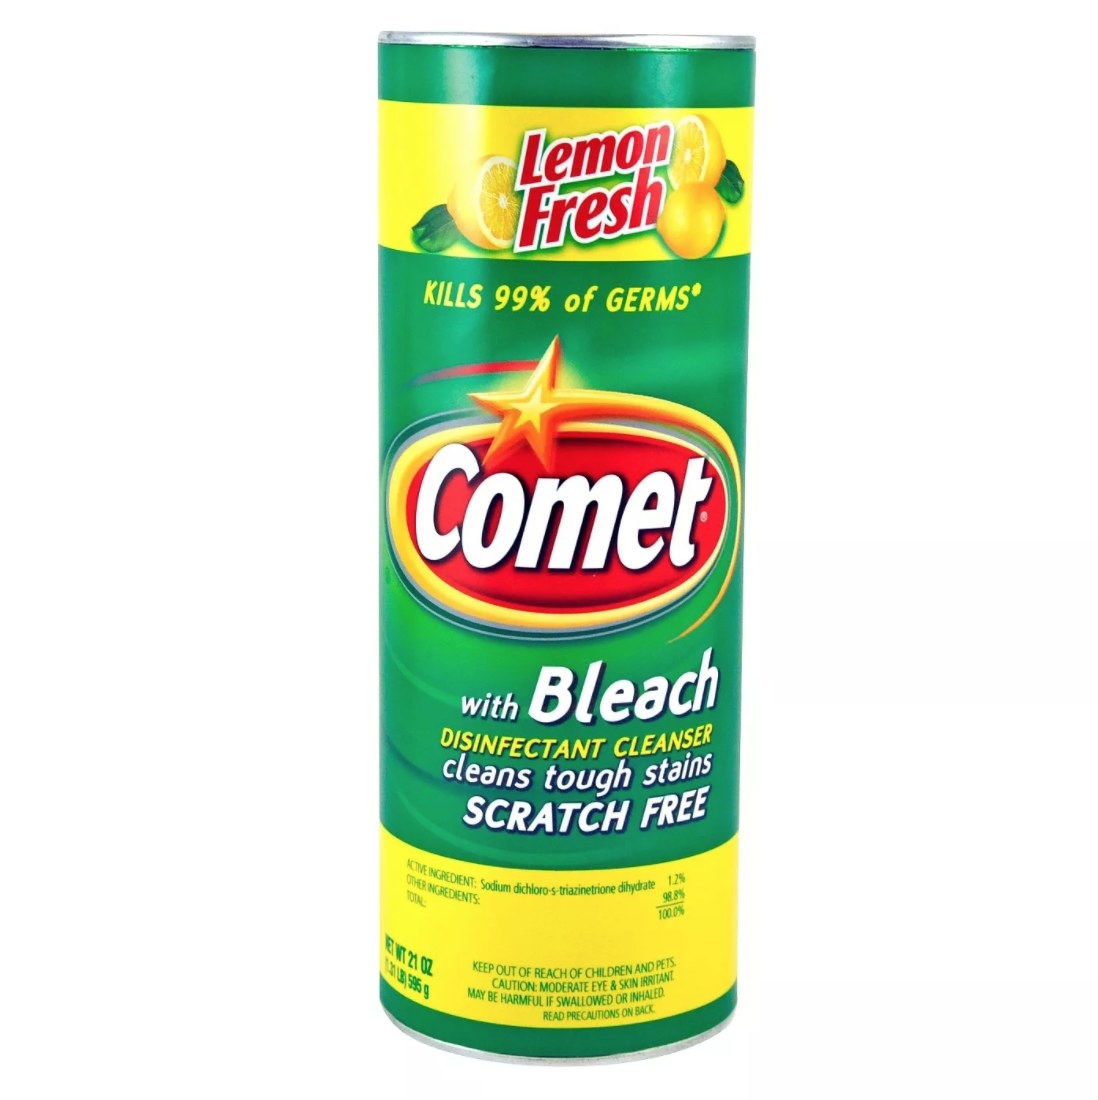 A can of Comet cleaner